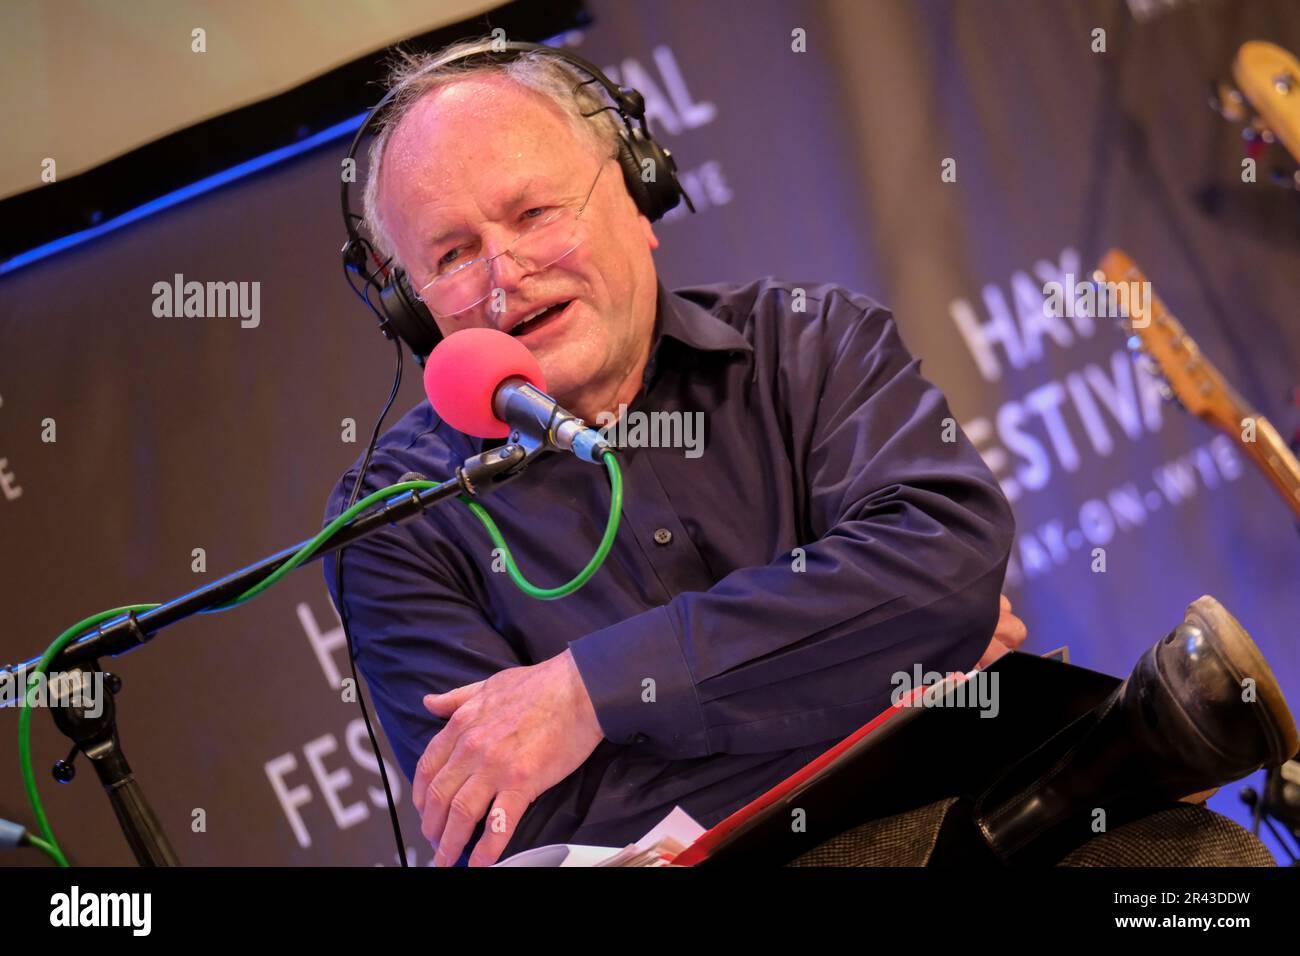 Hay-on-Wye, Herefordshire, UK Thursday 25 May 2023, 5pm Venue: Llwyfan Cymru – Wales Stage BBC Radio 4 Loose Ends producers Clive Anderson and Andrew O’Neill bring the chat and laughs of Radio 4’s top entertainment show to the Hay Festival. Guests are Simon Day, Maggie Aderin-Pocock, Joseph Coelho and Dr Ranj, with music from Panic Shack.Credit: Ian Tennant/Alamy Live News  Stock Photo